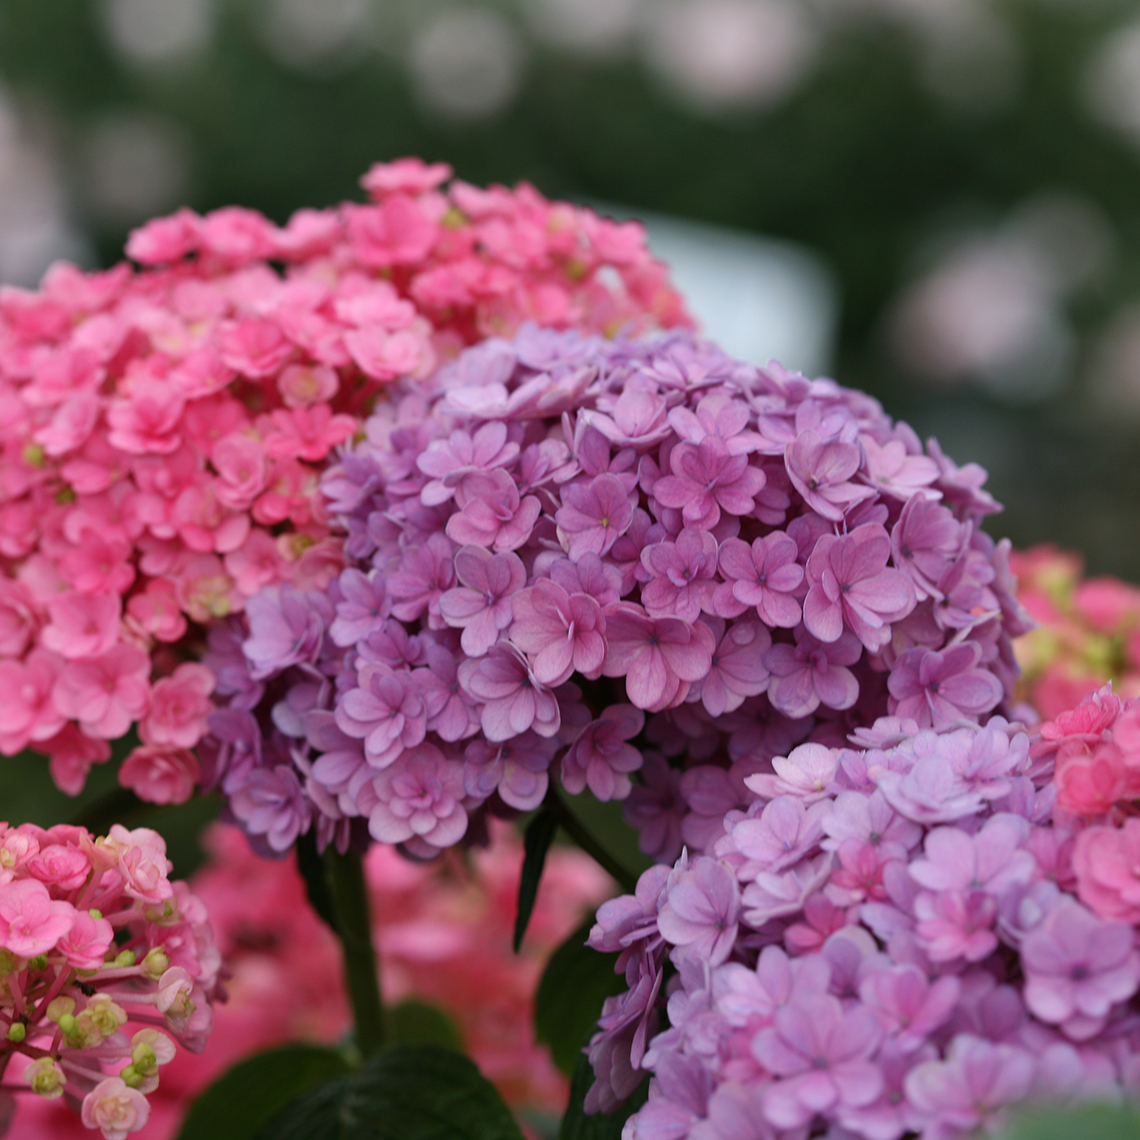 Paraplu hydrangea flowers showing the pink and purple color variants